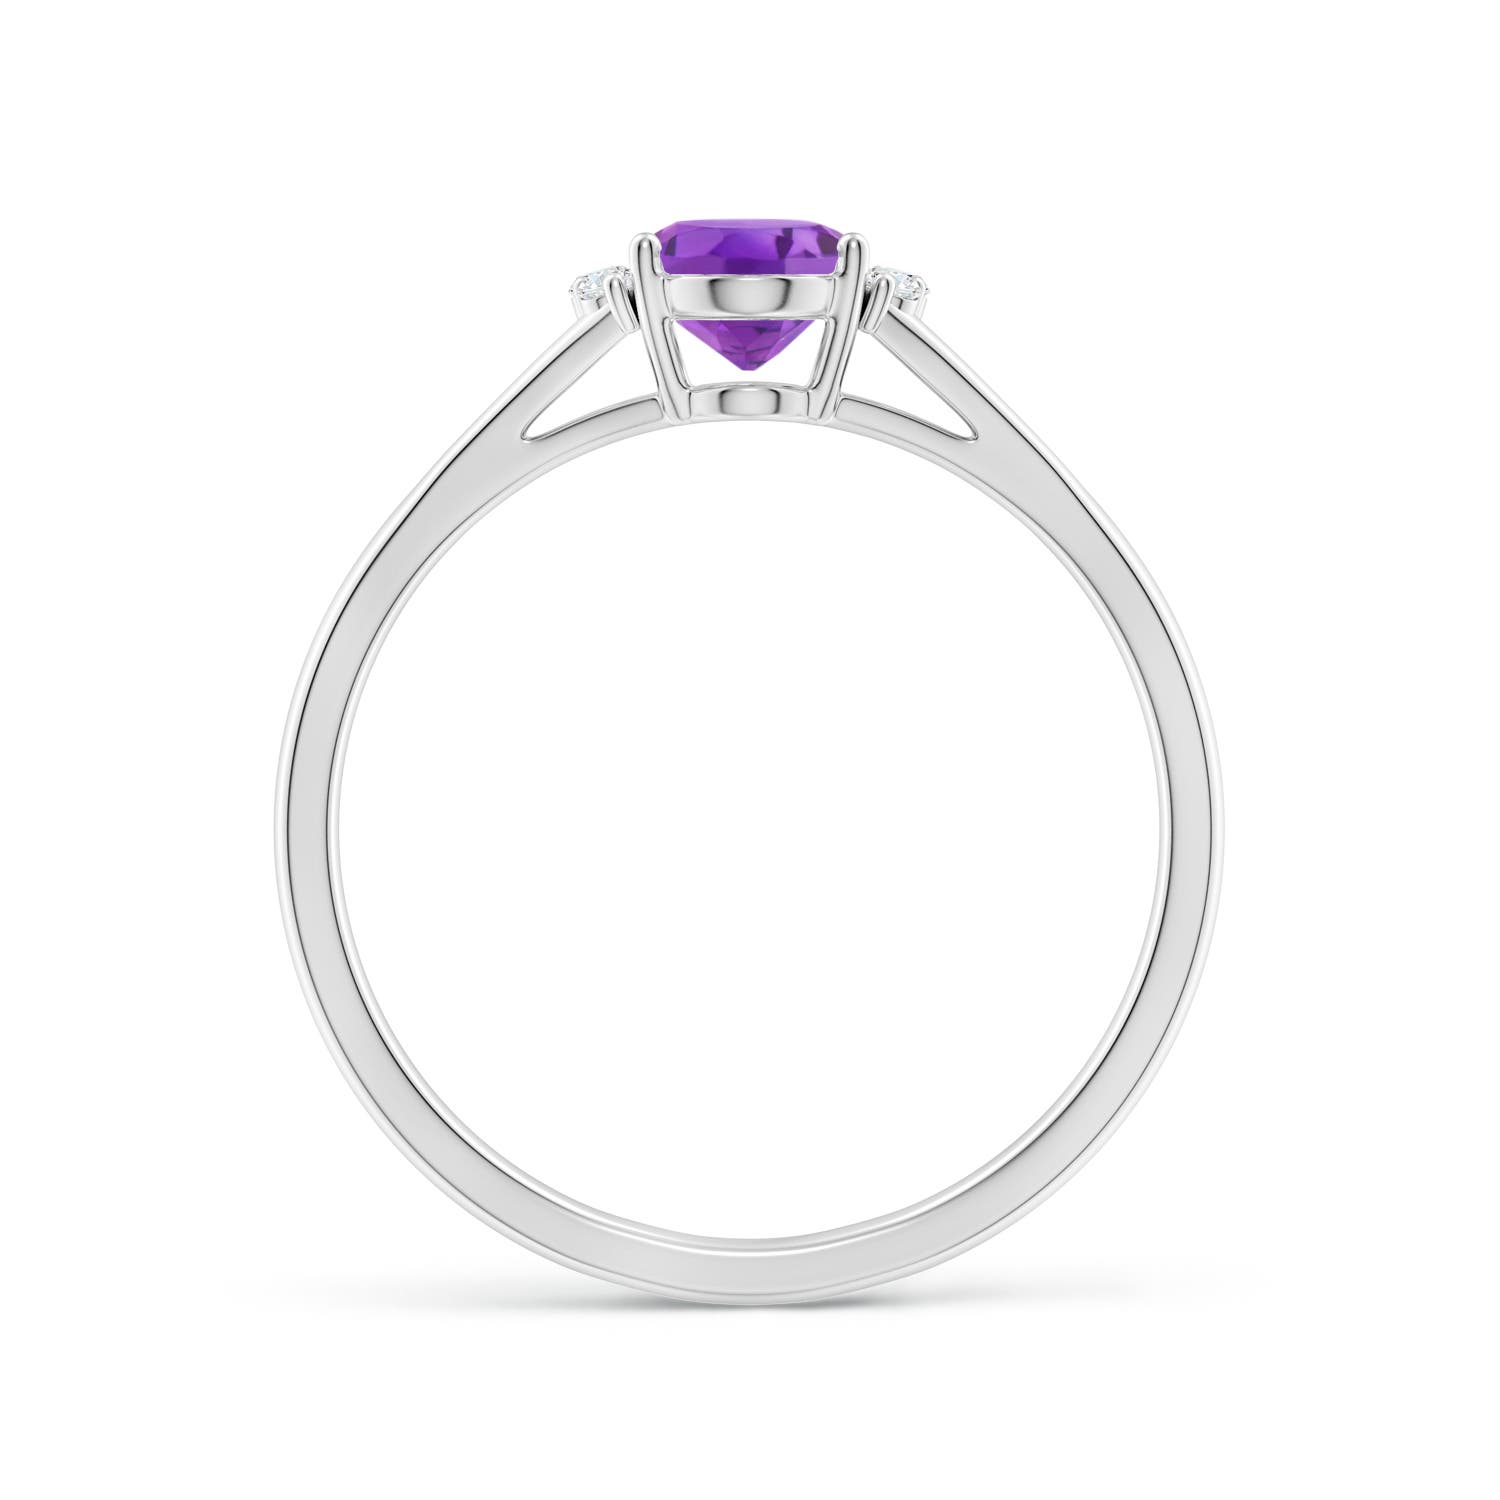 AA - Amethyst / 0.77 CT / 14 KT White Gold